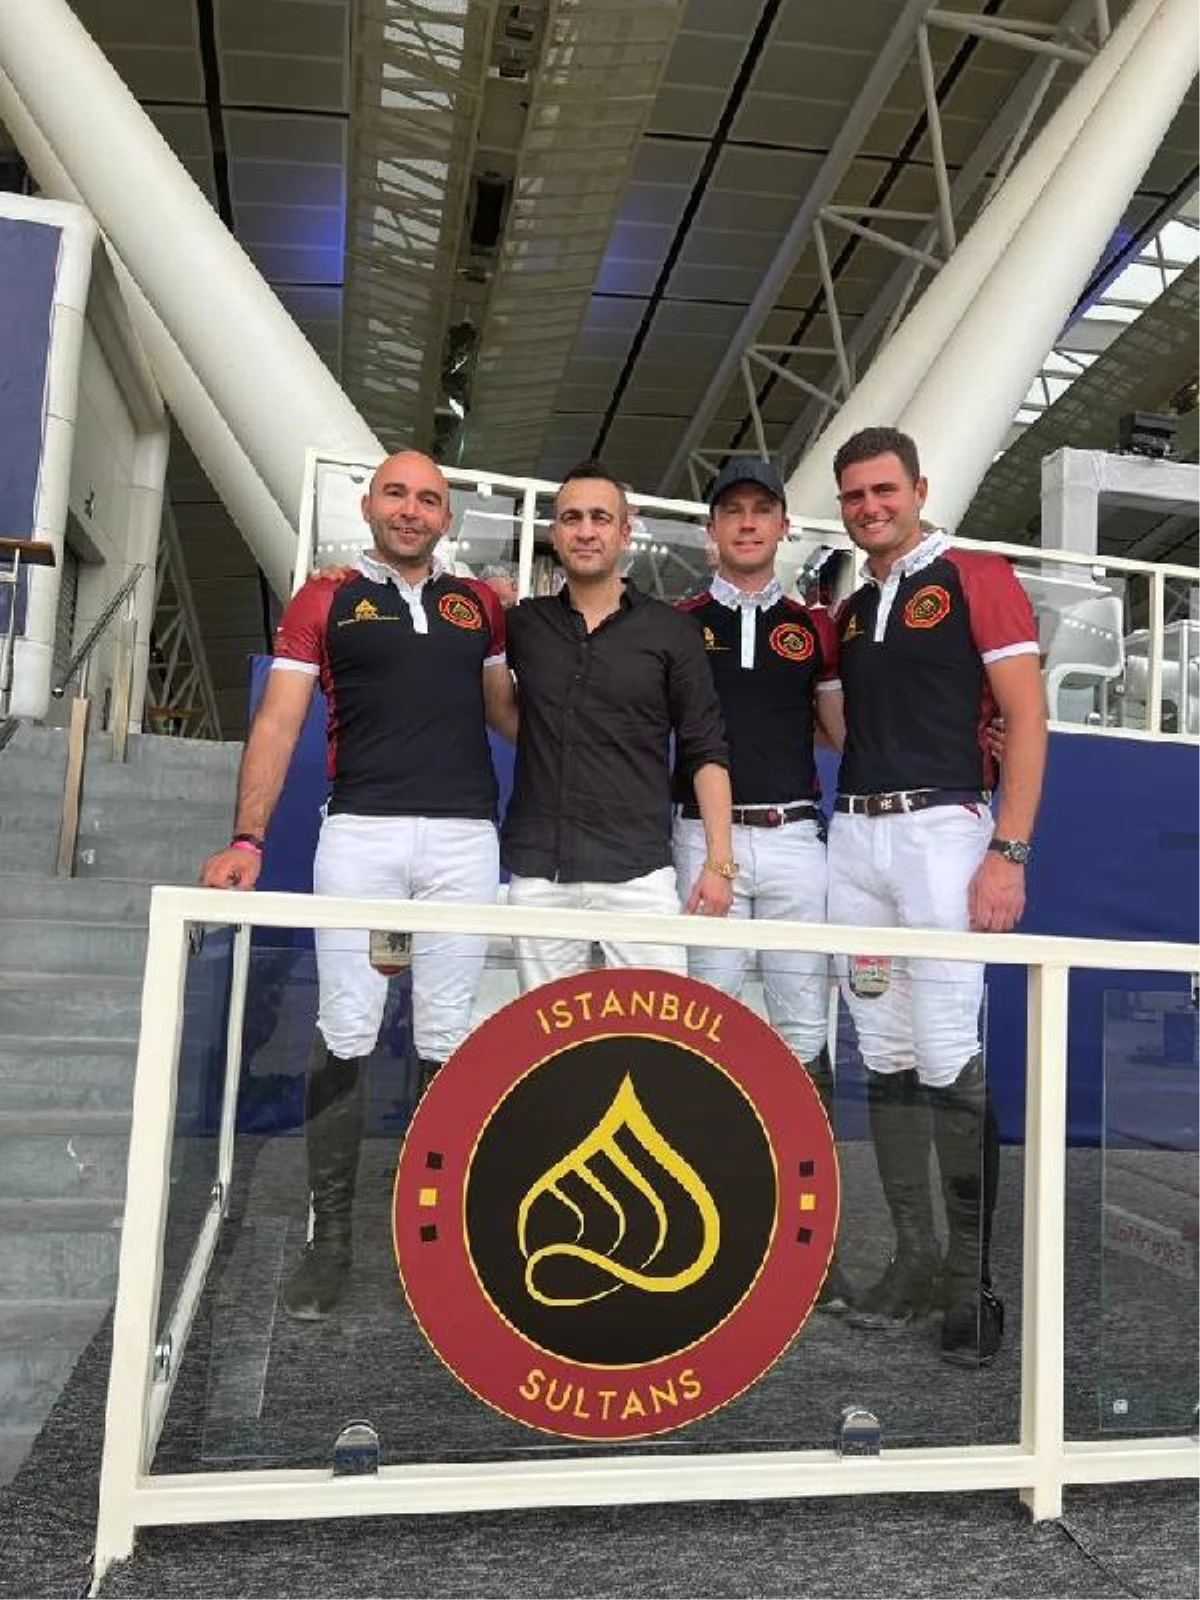 Goal of the Sultans: Bringing the 5-star Equestrian Tournament to Türkiye